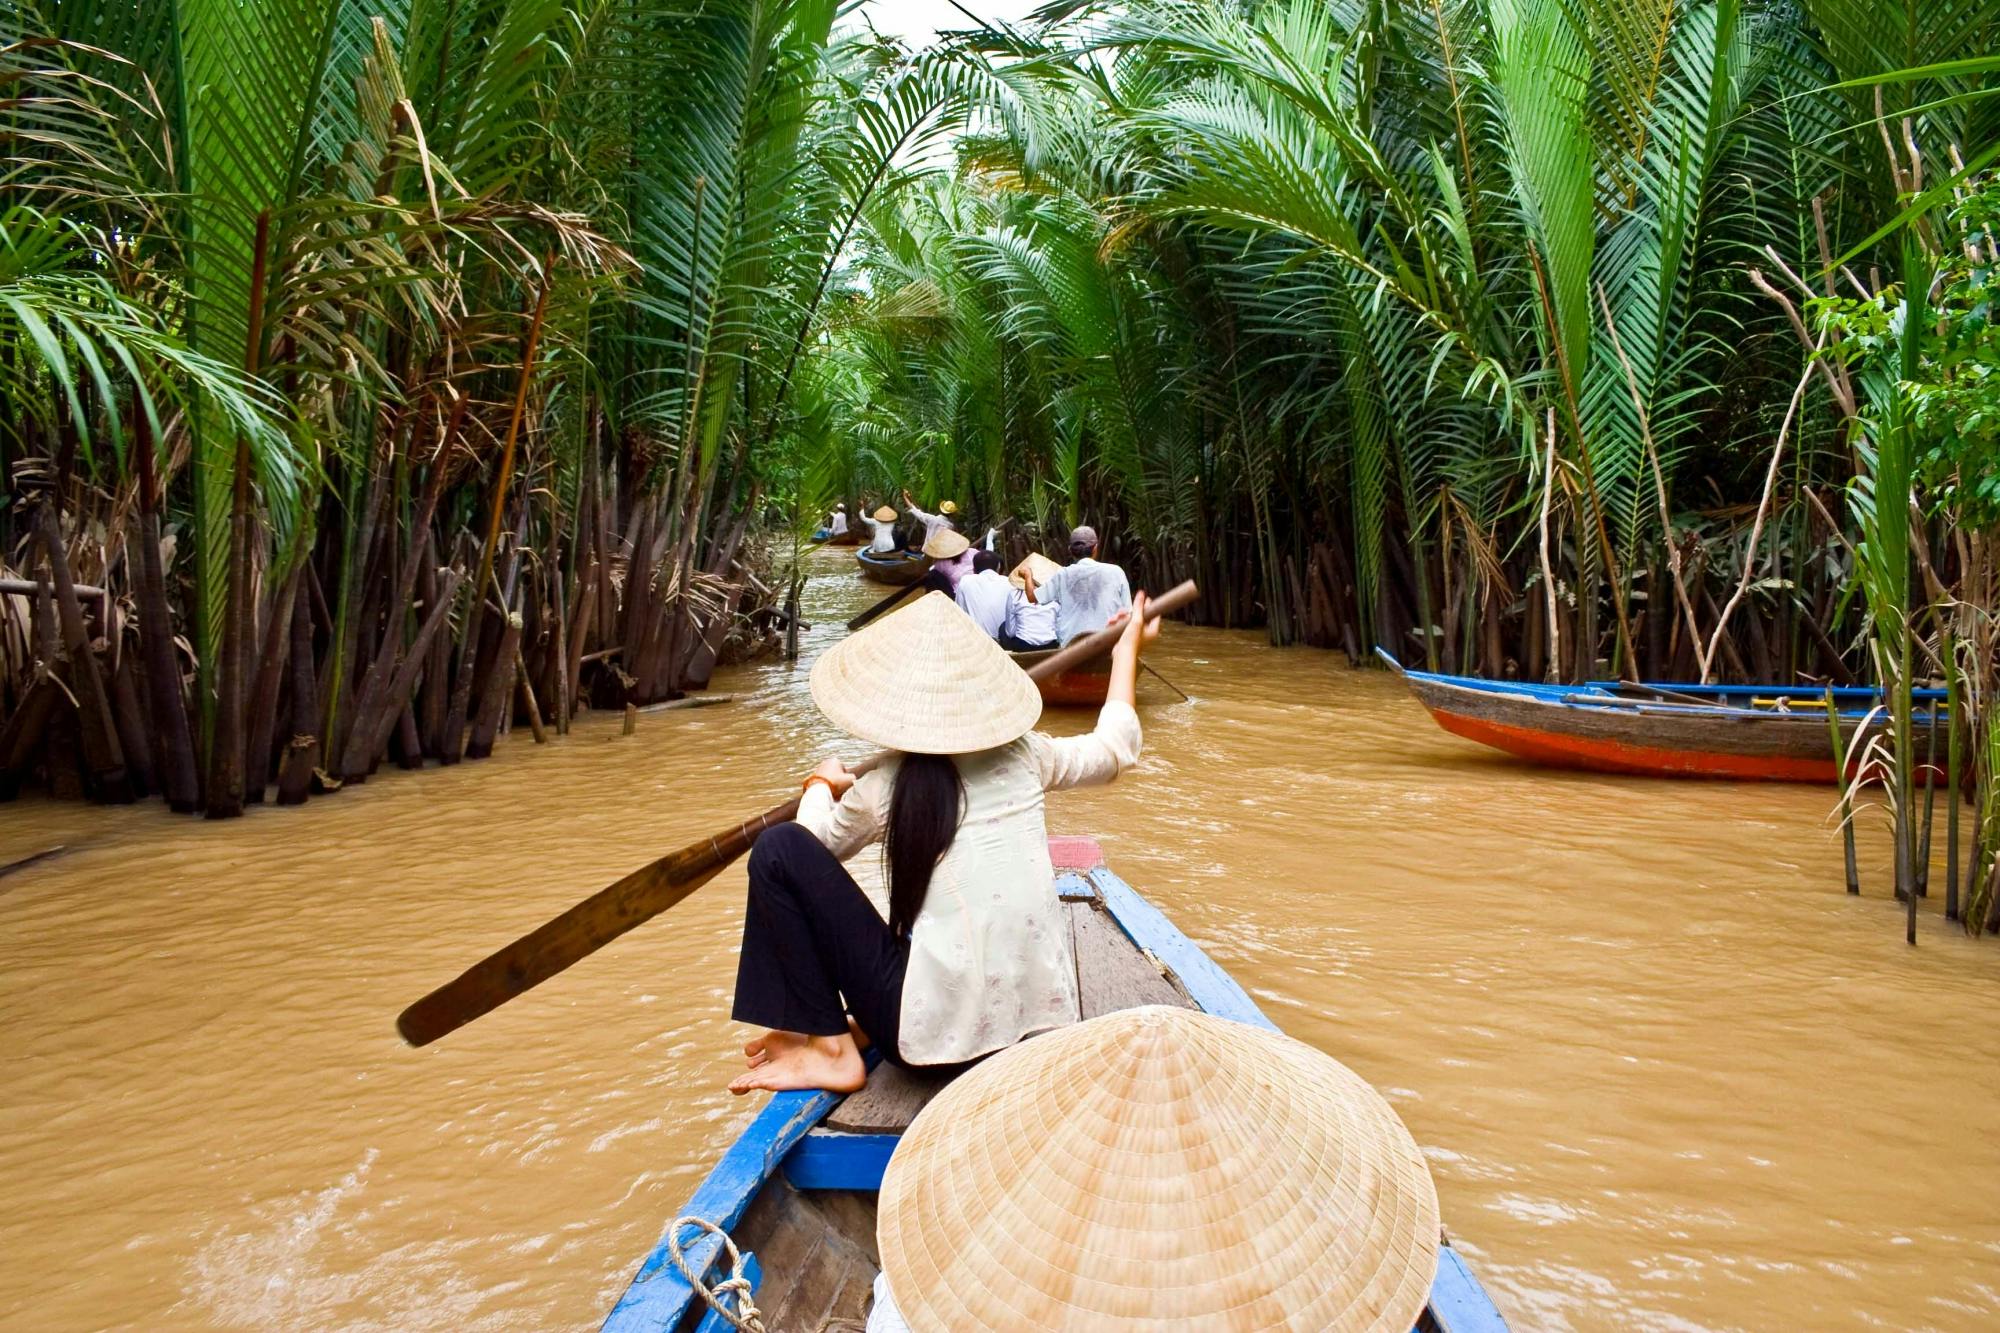 Full day Mekong Delta guided tour from Ho Chi Minh City Musement